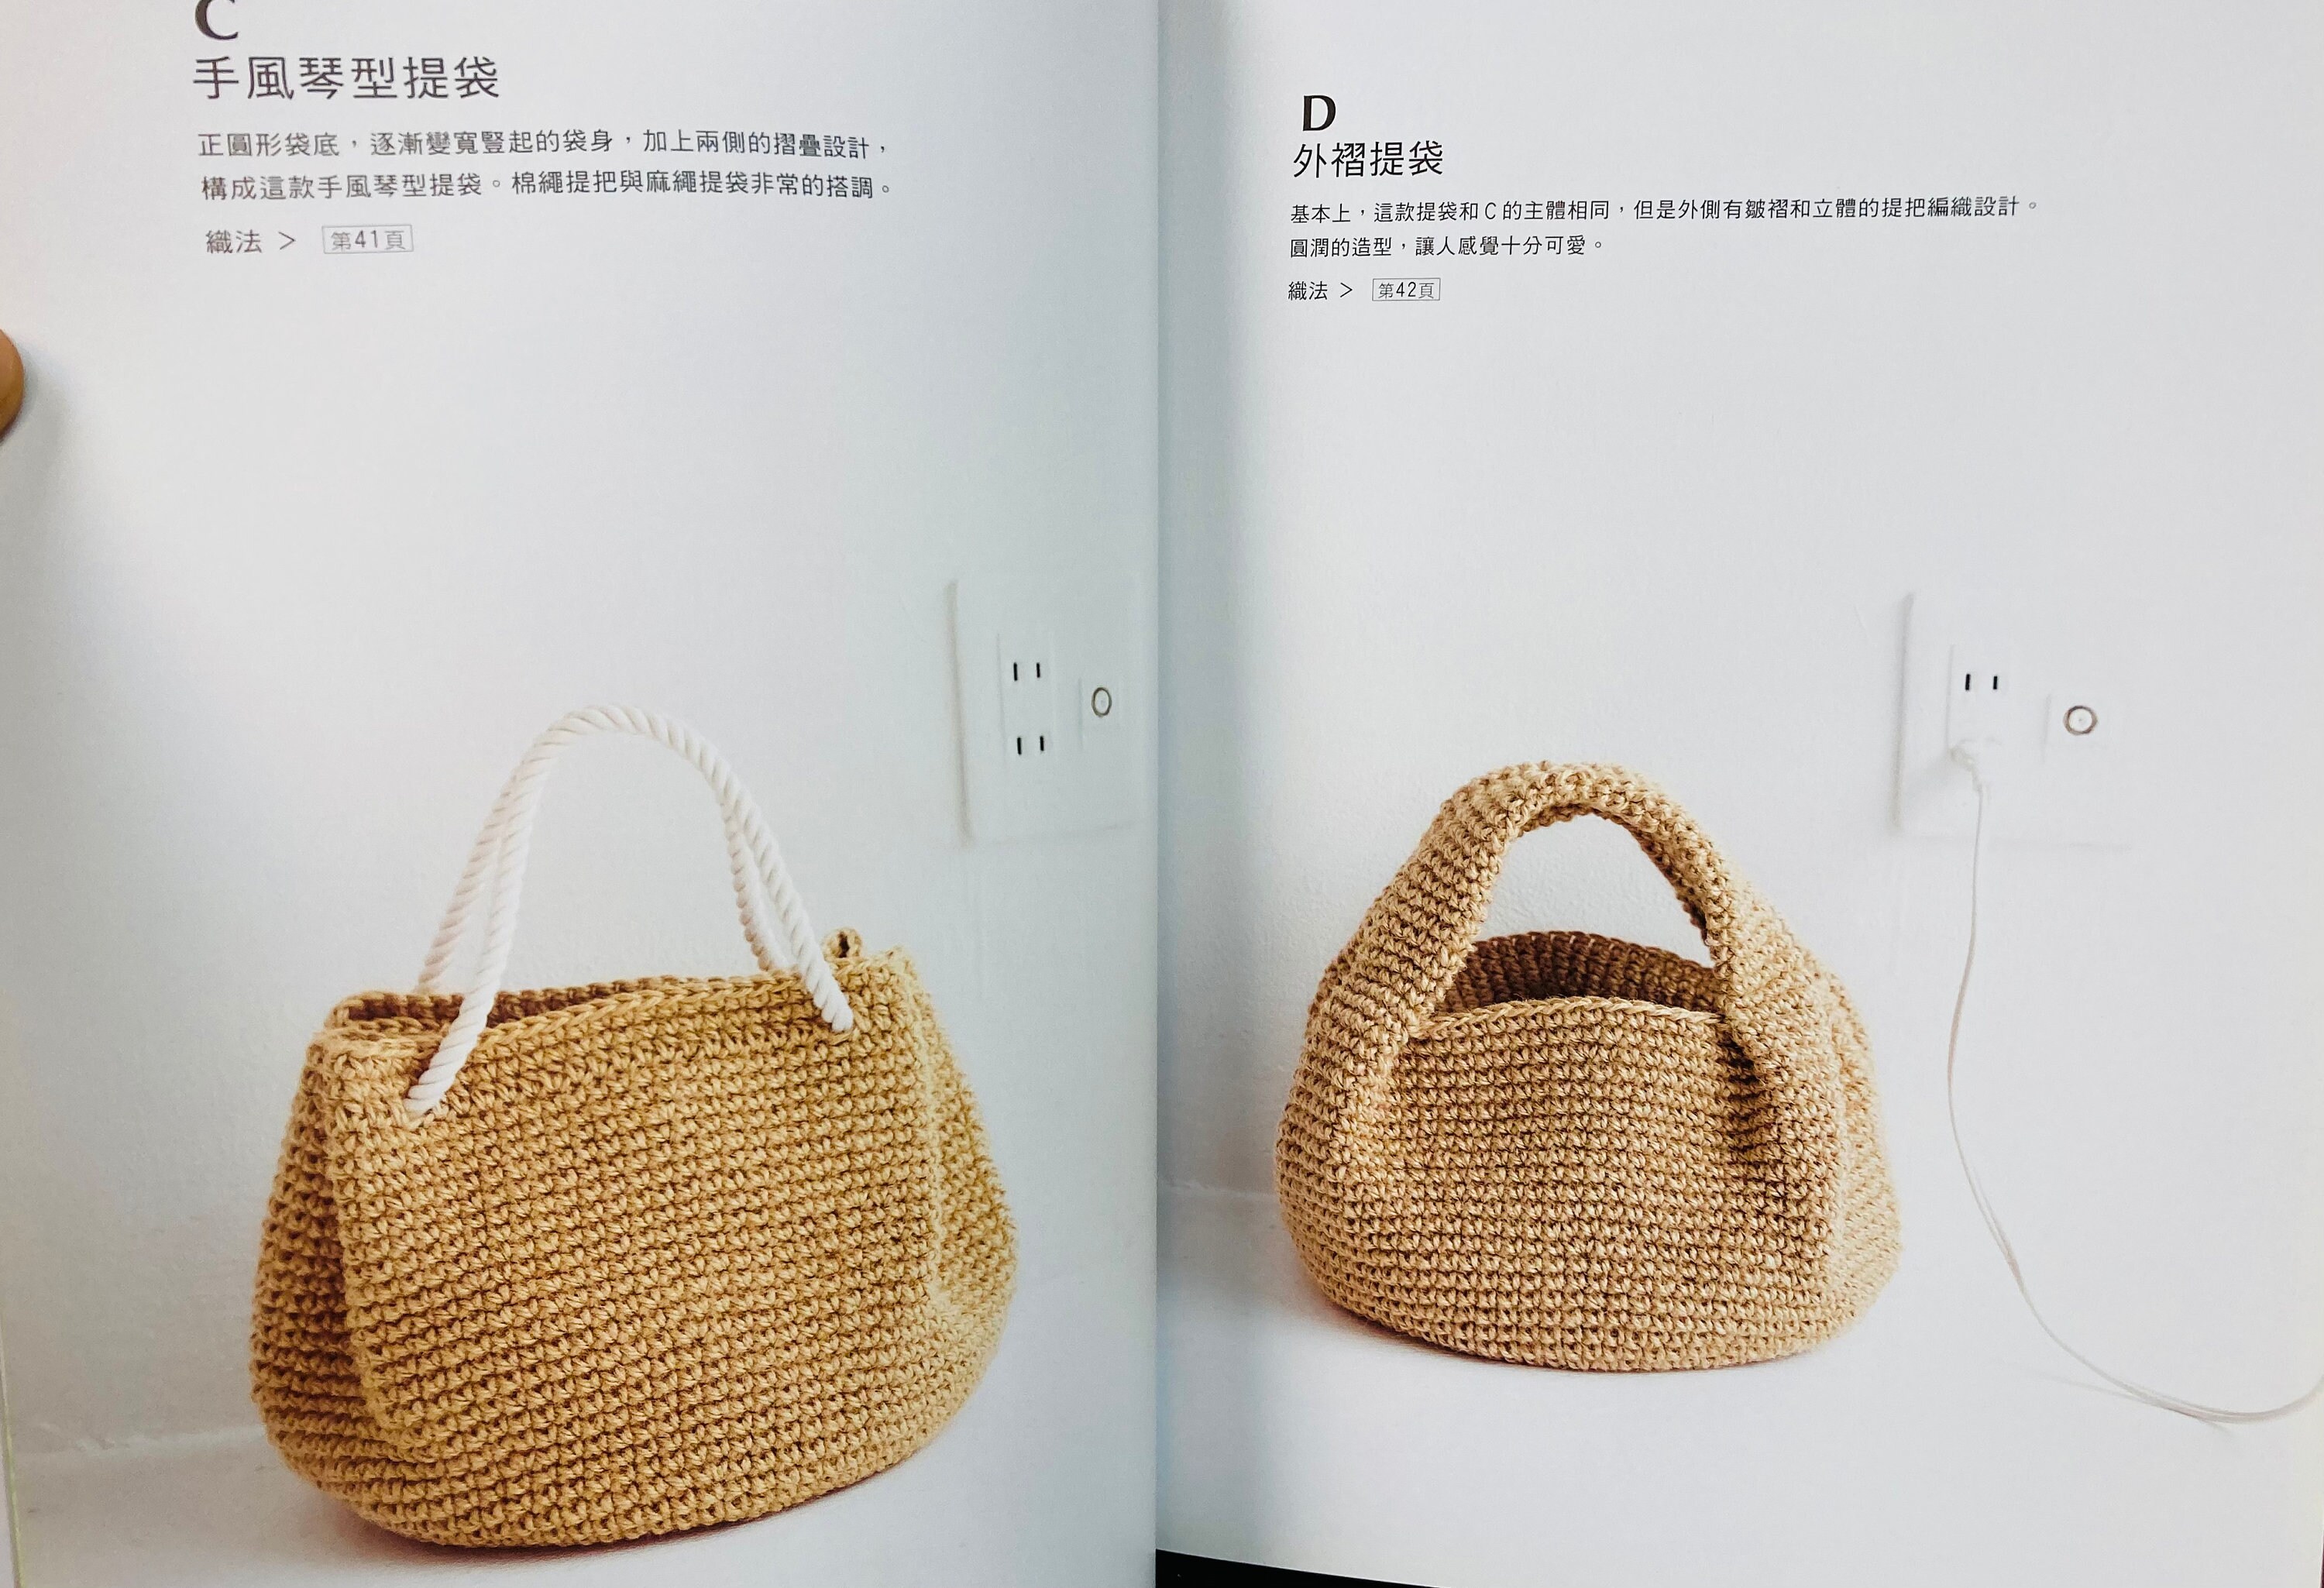 Crocheting and Knitting Bags for Winter Japanese Craft Book 